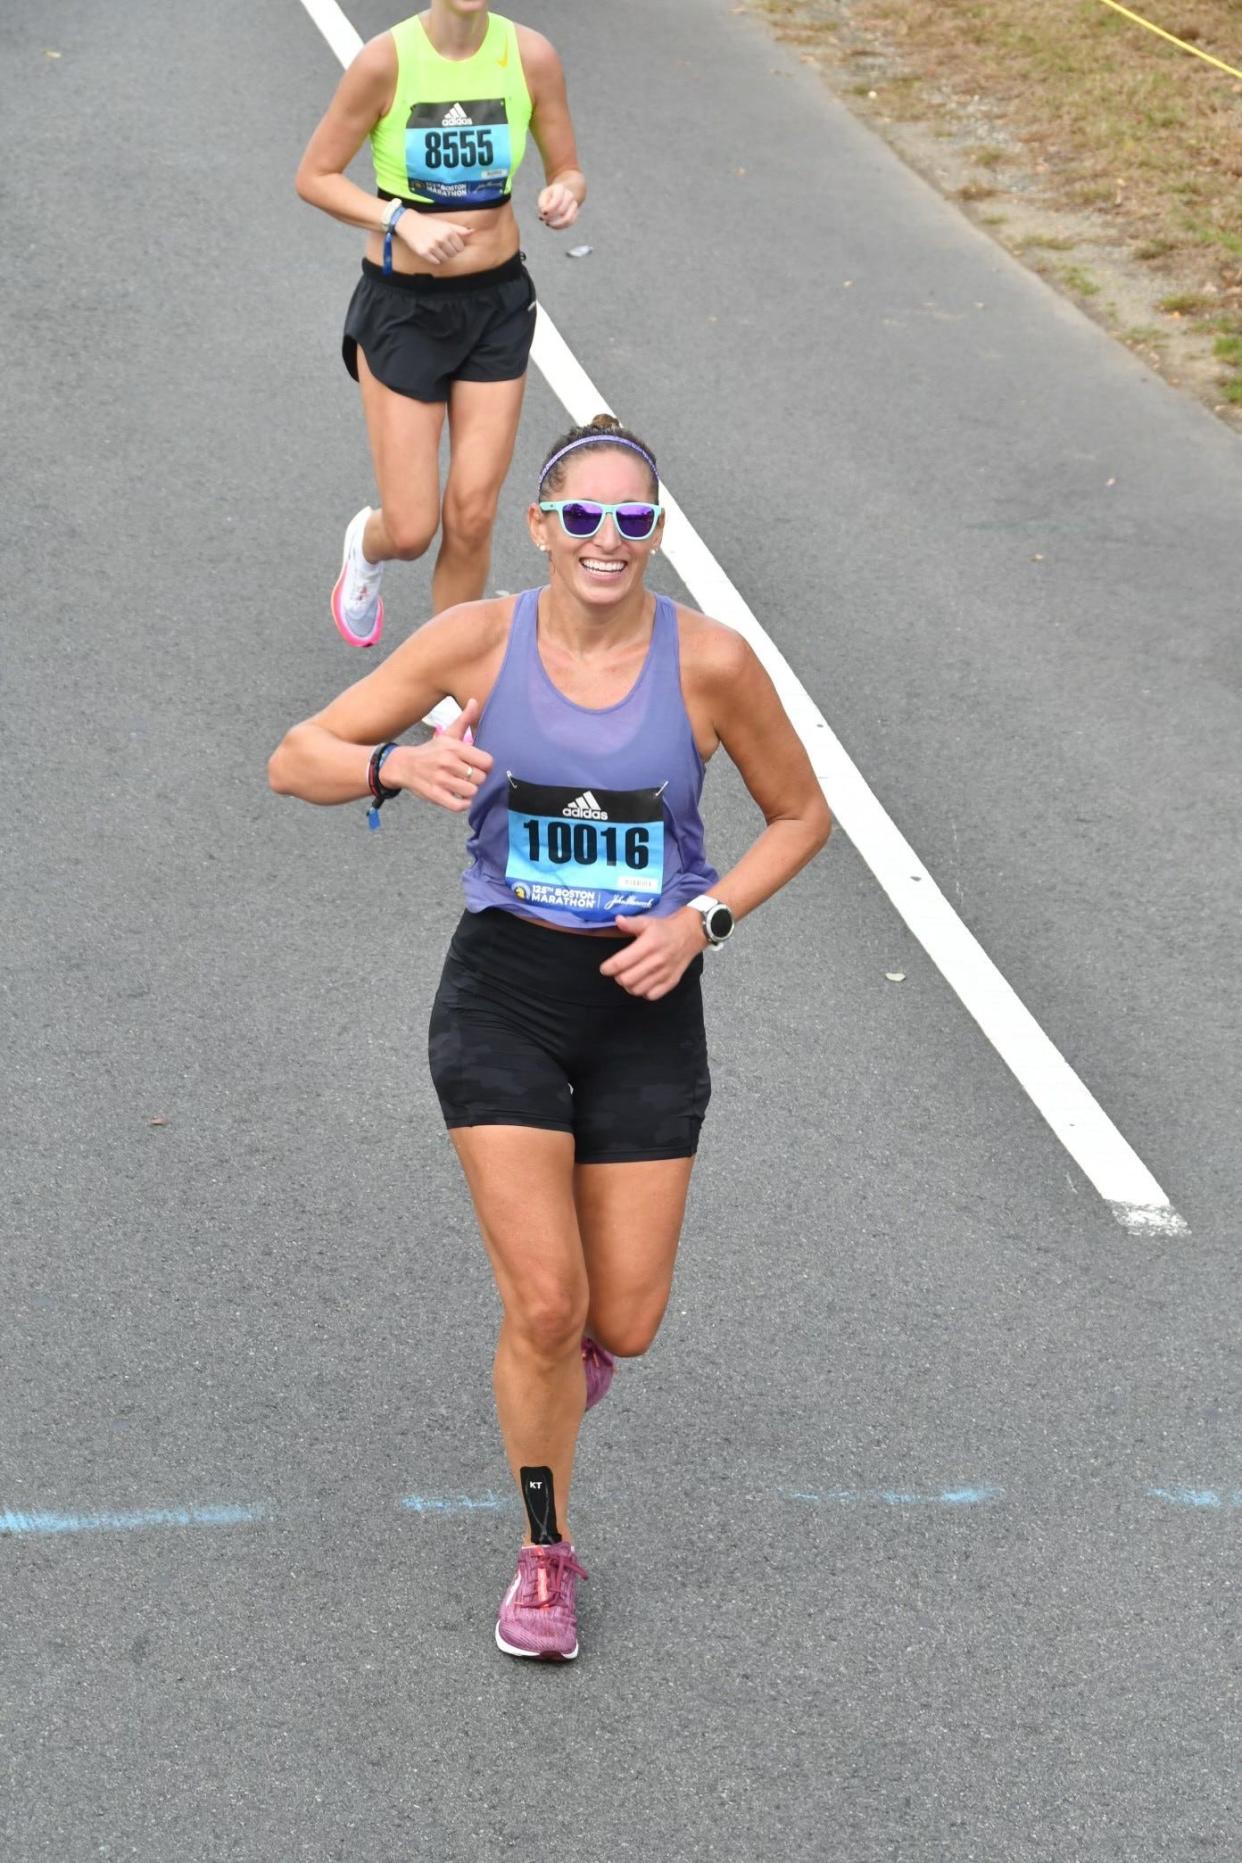 Caroline Keating completed a 100-mile race in 2021 in just over 26 hours. Months later, she was forced to quit exercising completely due to heart problems.